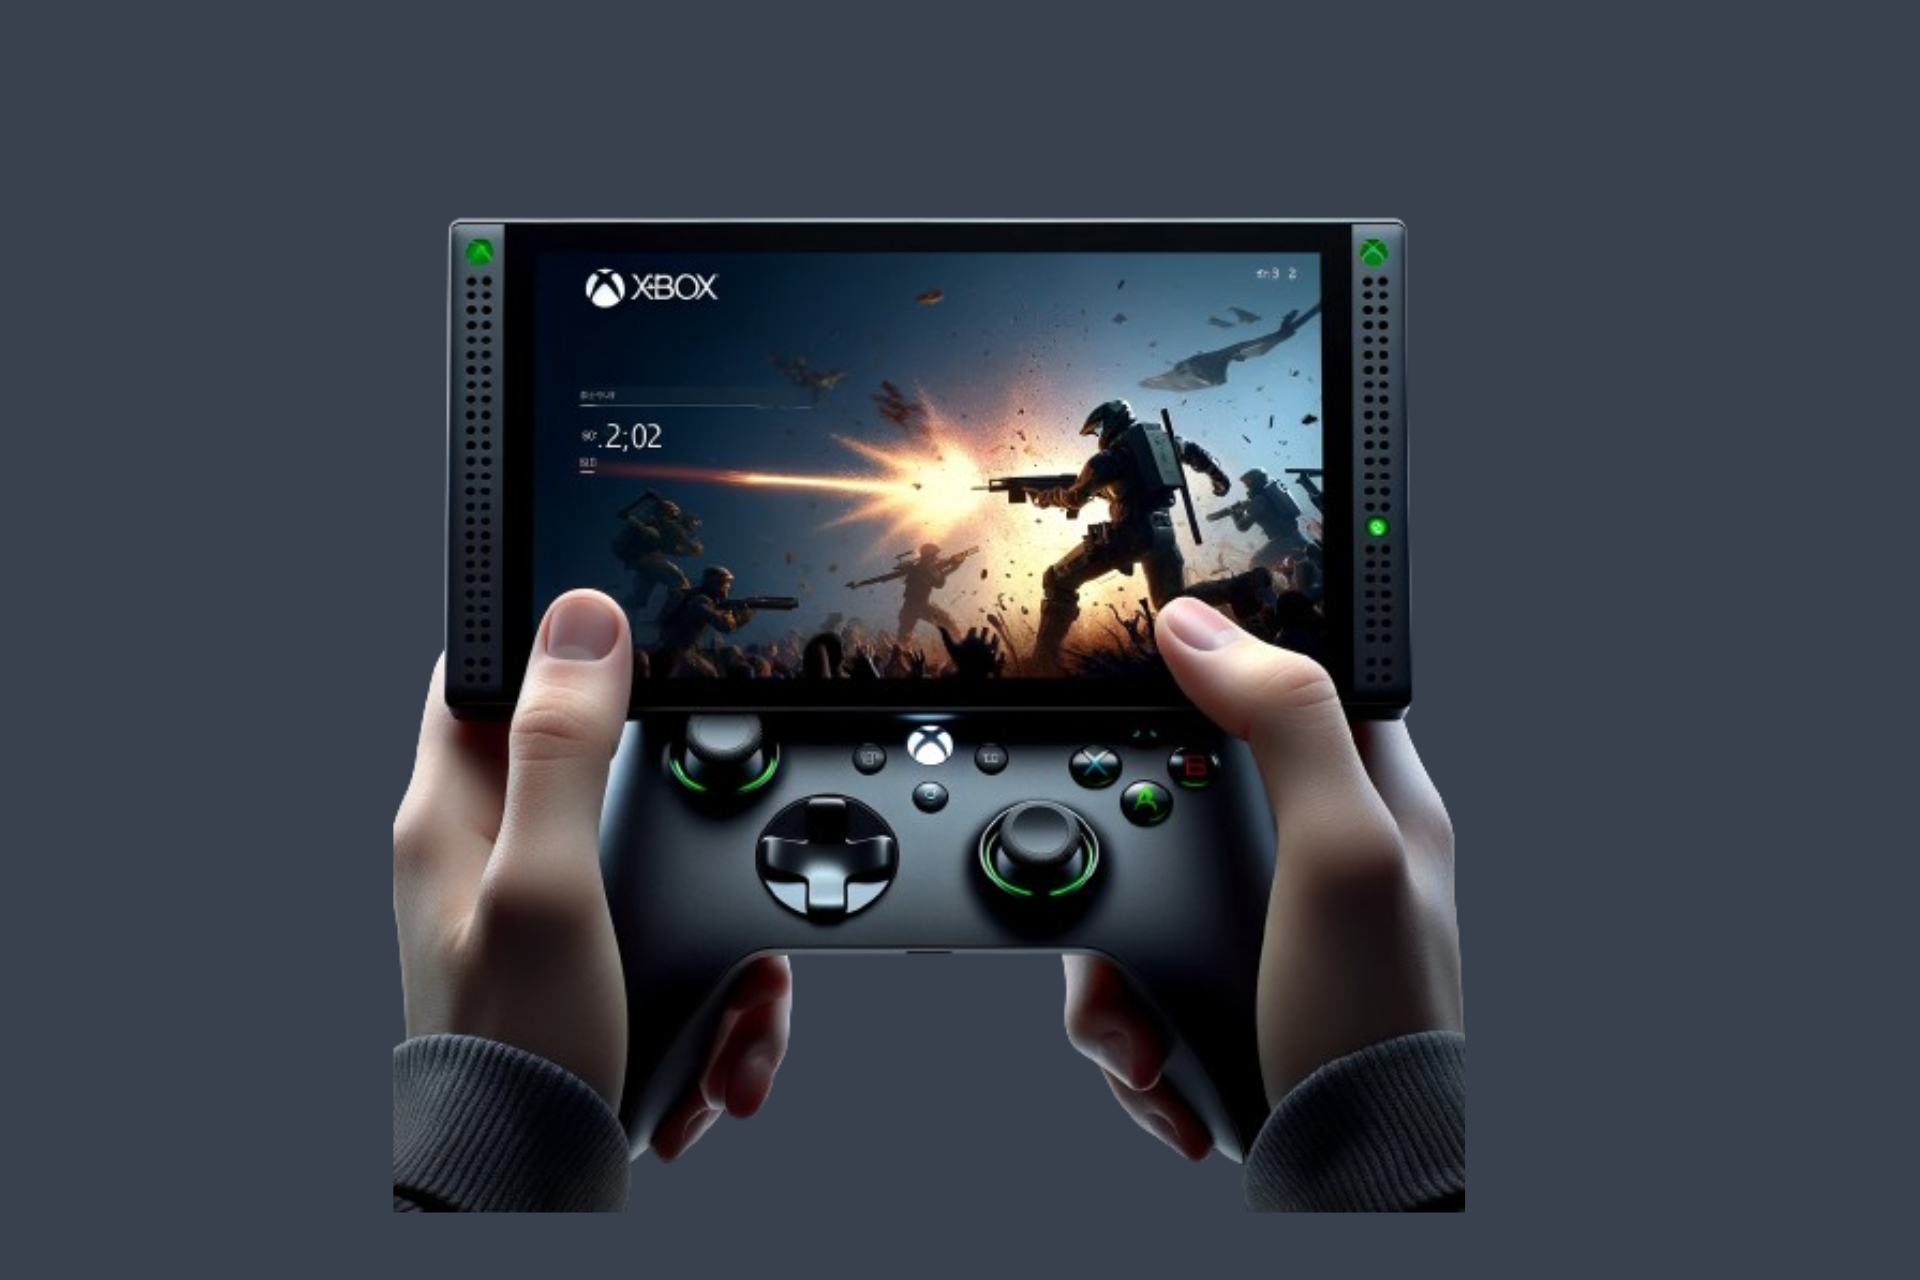 Will we be getting a handheld Xbox soon? Here's what Microsoft's gaming head has to say